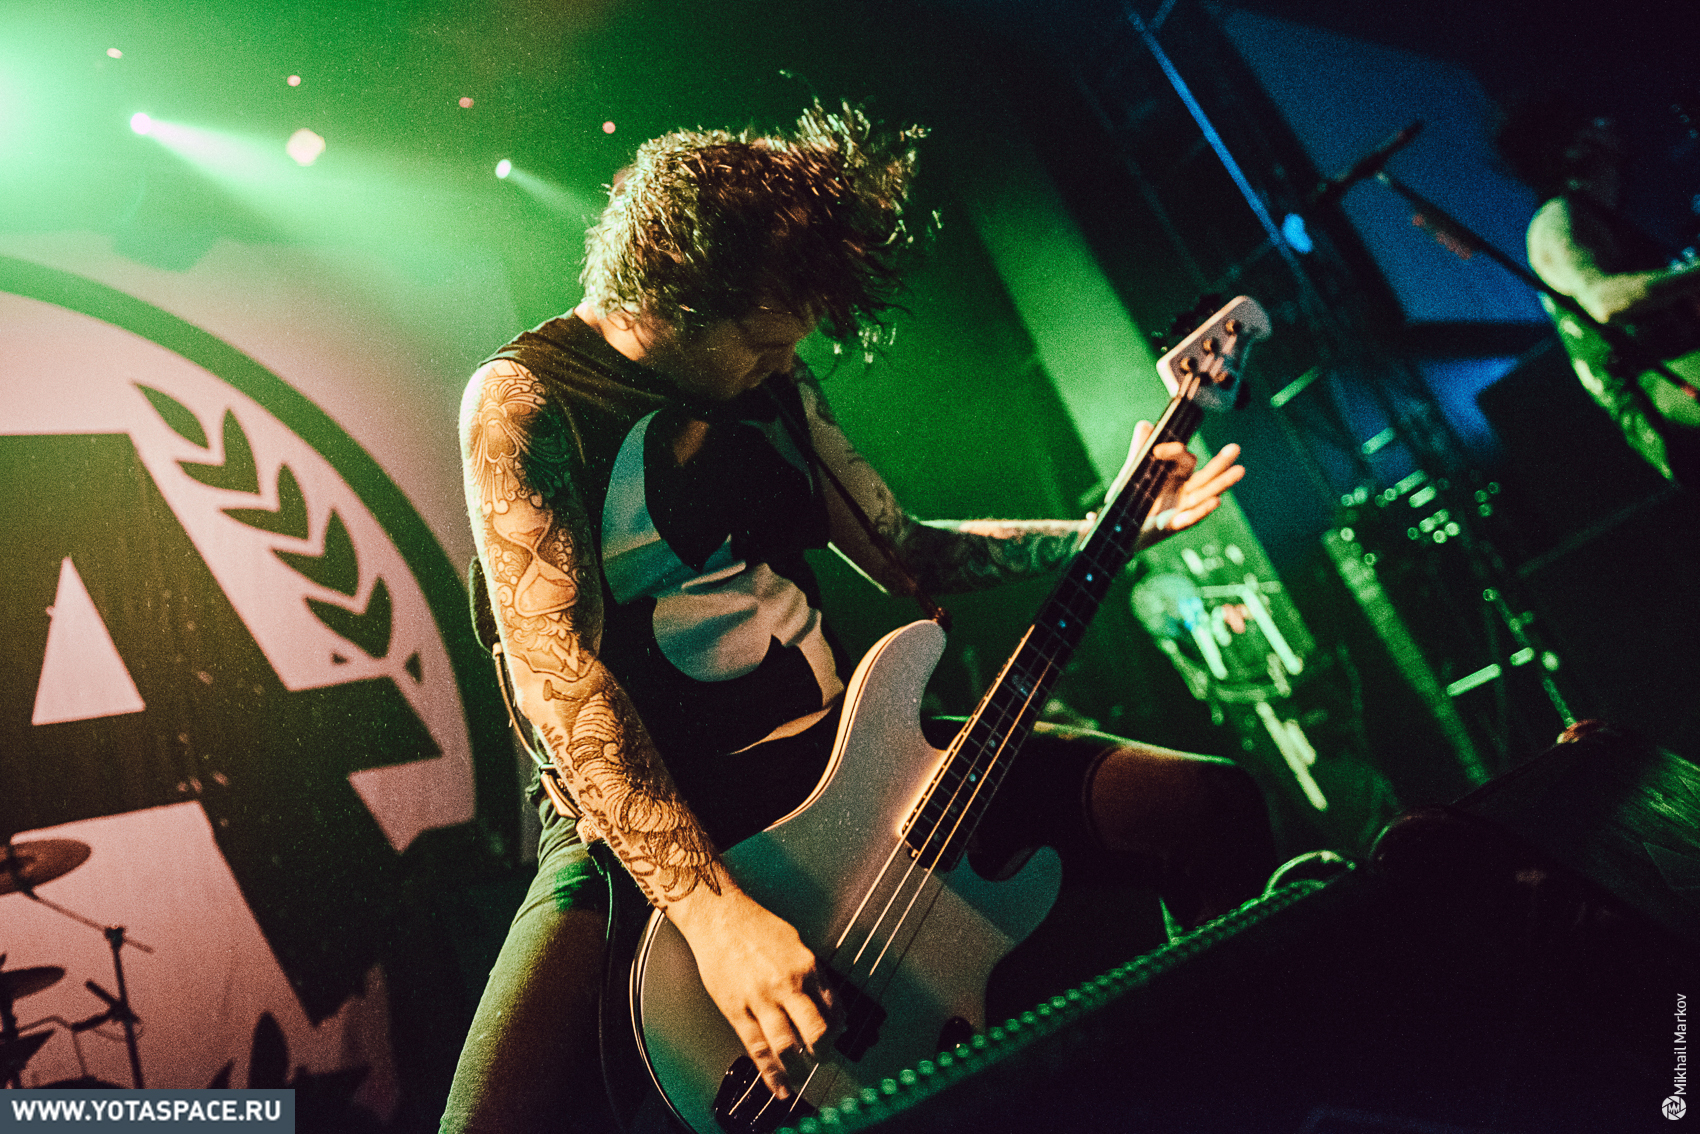 ASKING ALEXANDRIA, a completely crazy band ALTERNATIVE ROCK/POST-HARDCORE/METALCORE, just blows away with their energy! - Good music, Hard rock, Metalcore, Post-Hardcore, Video, Youtube, Longpost